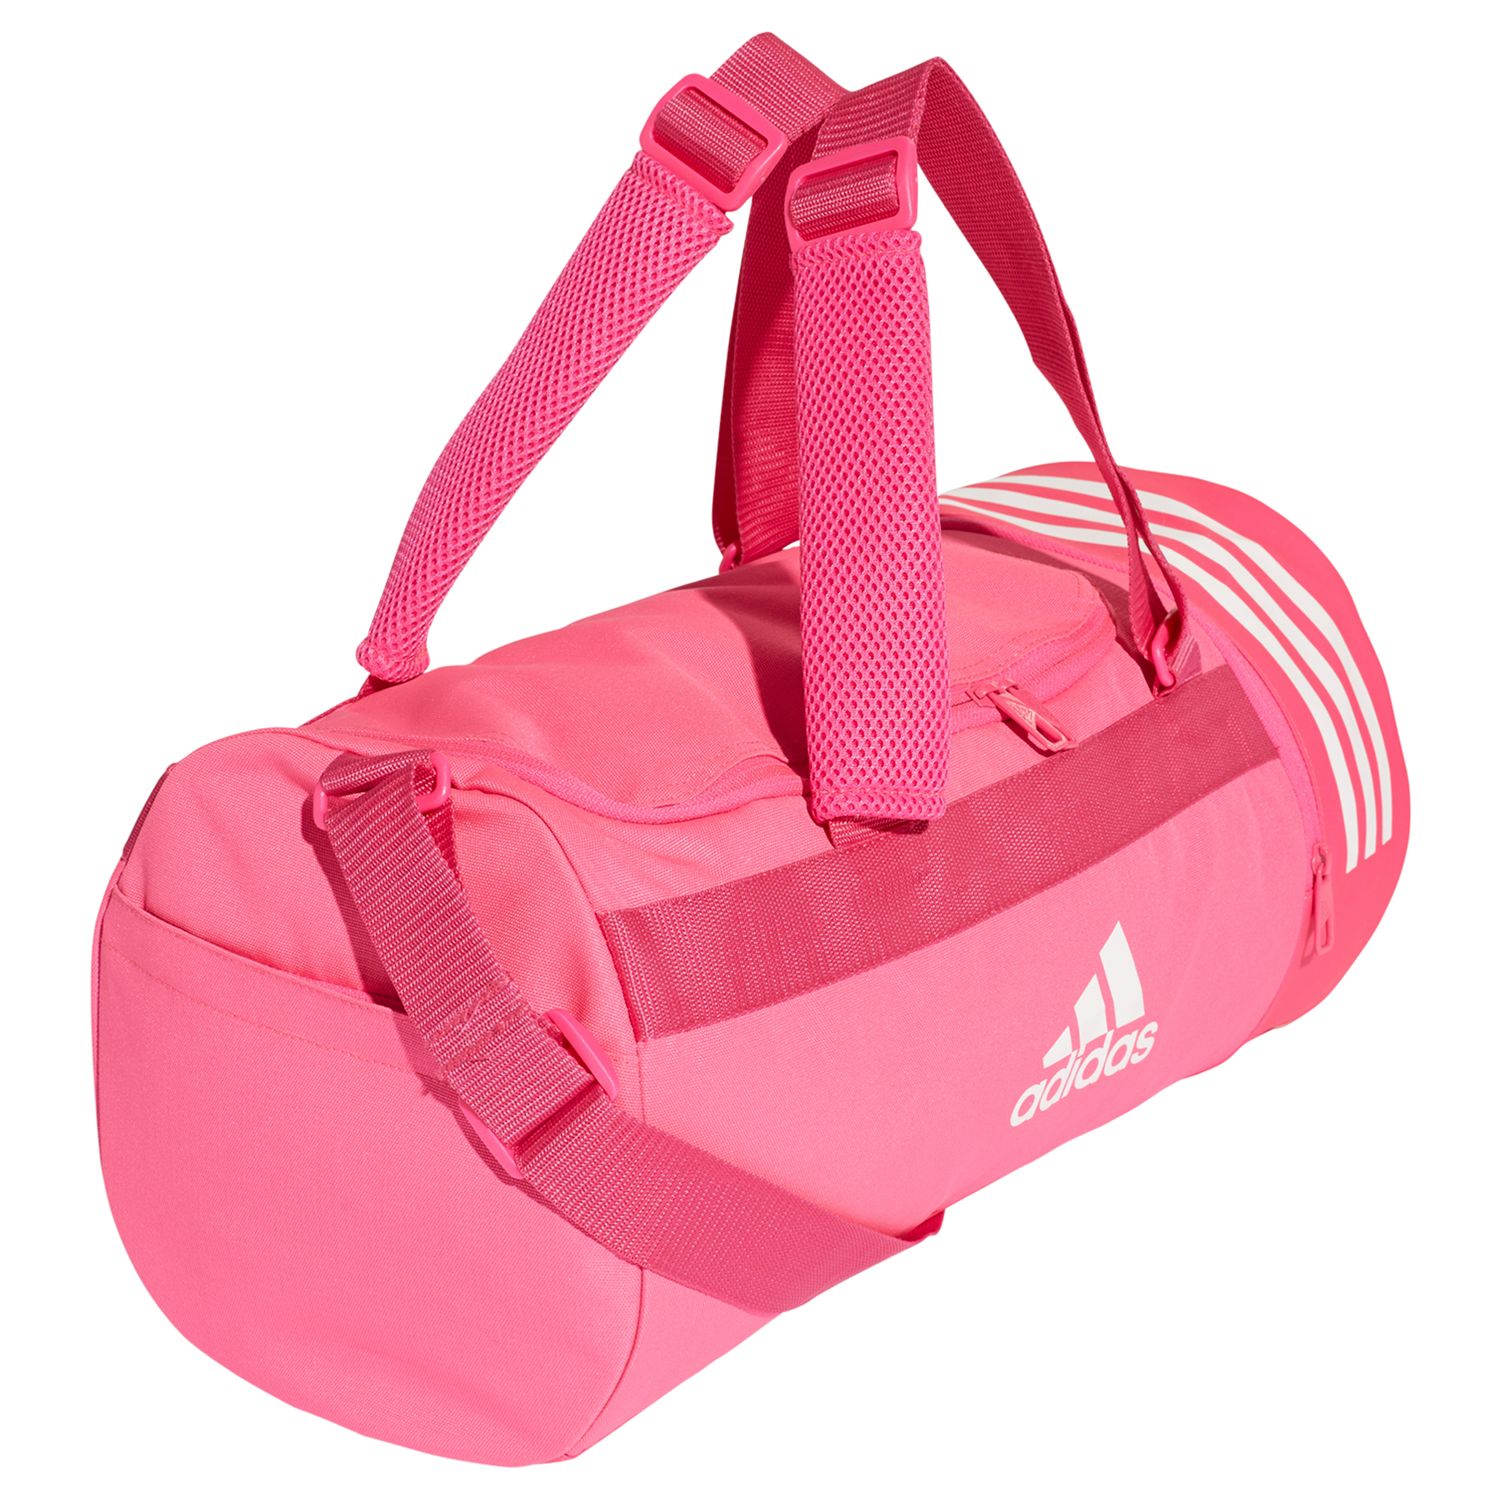 adidas duffle bag with shoe compartment